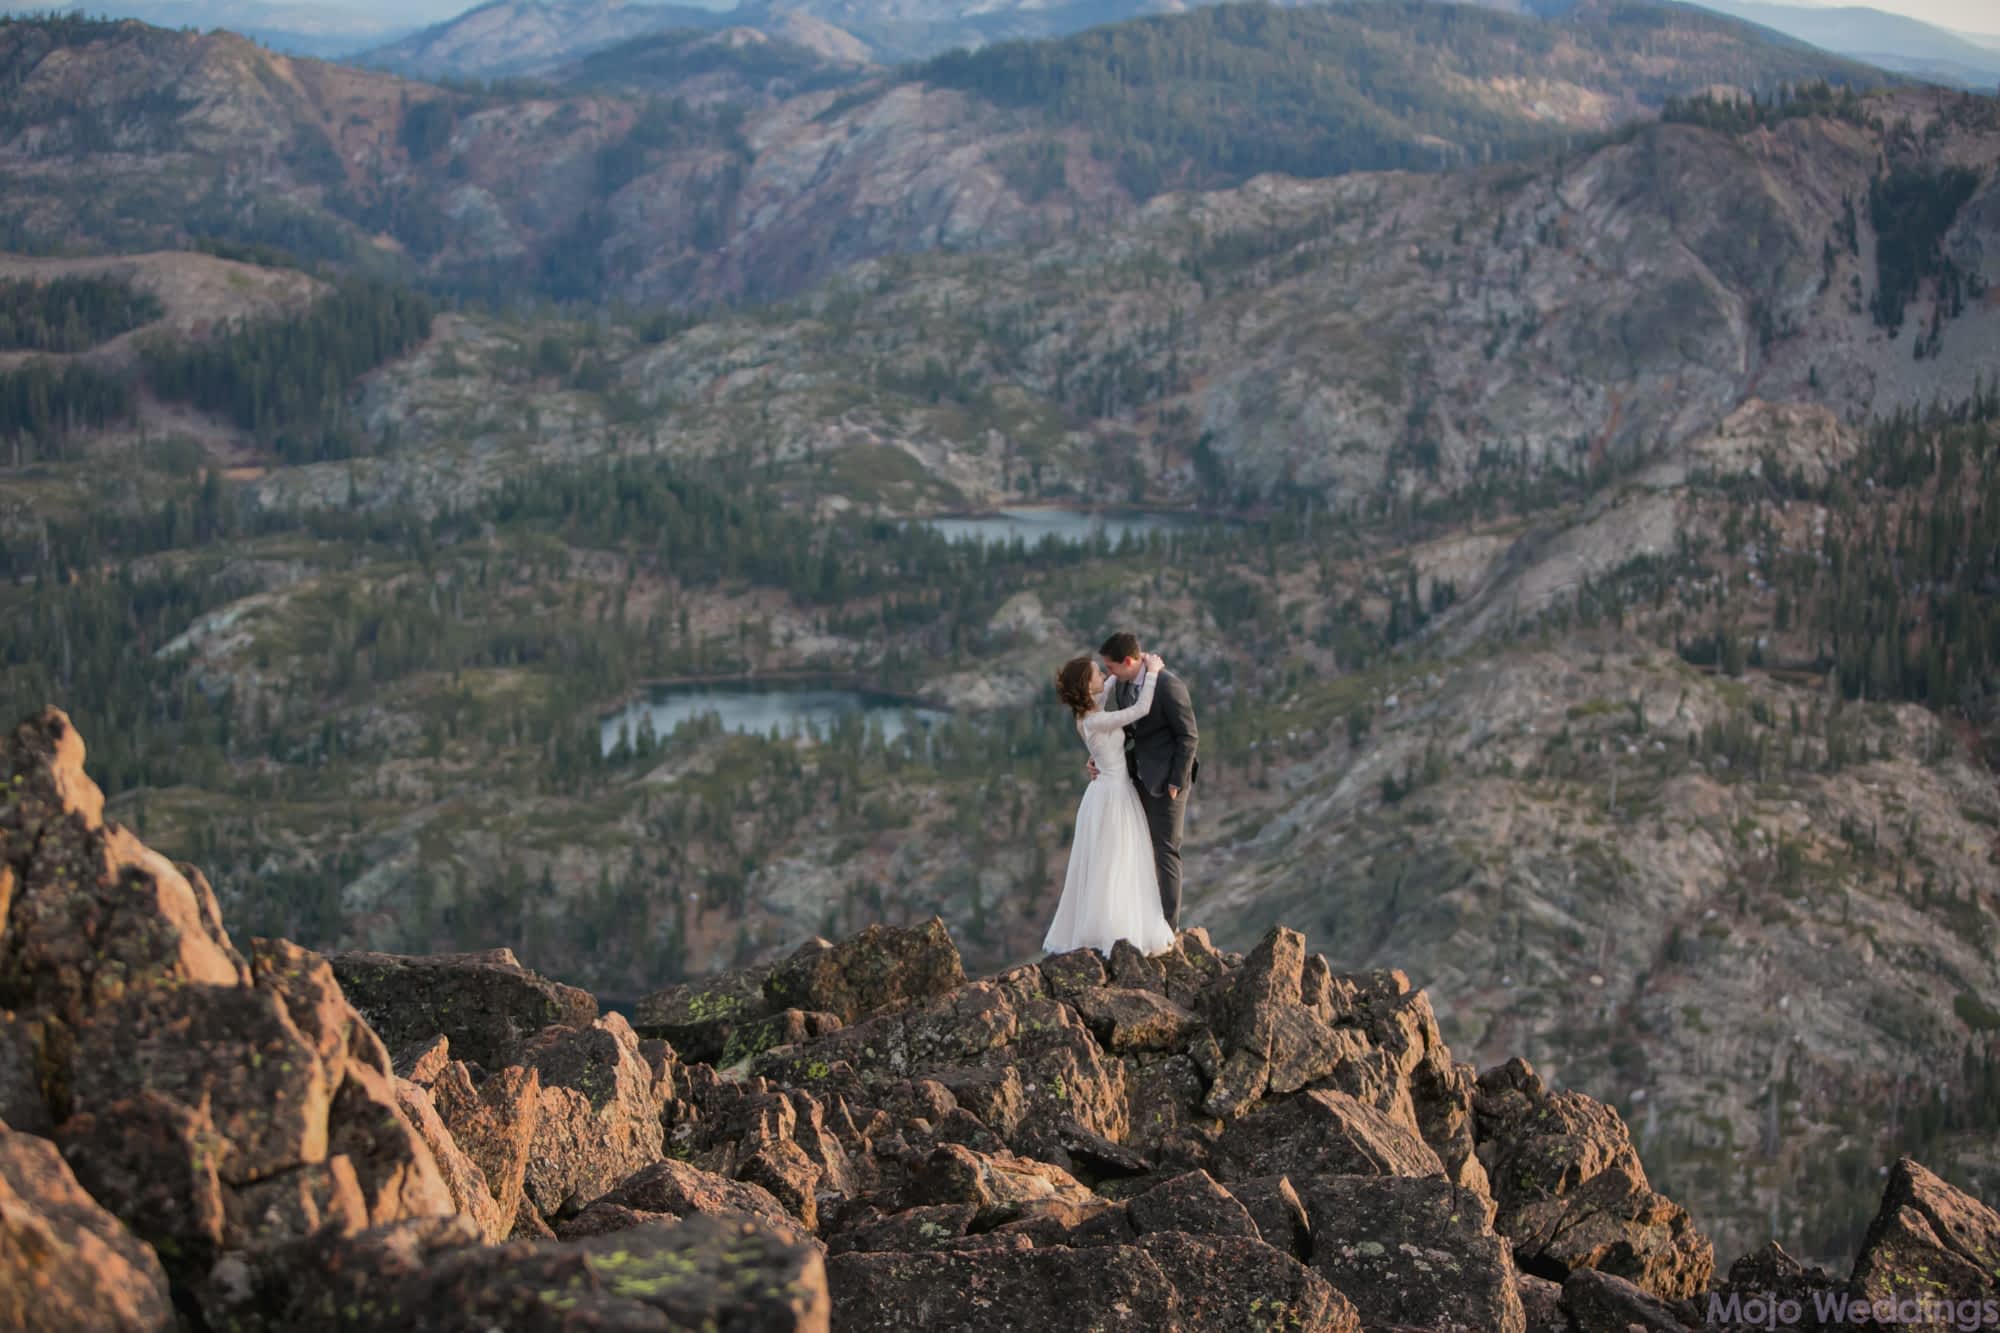 Her arms are around his shoulders as they stand against a mountain background.